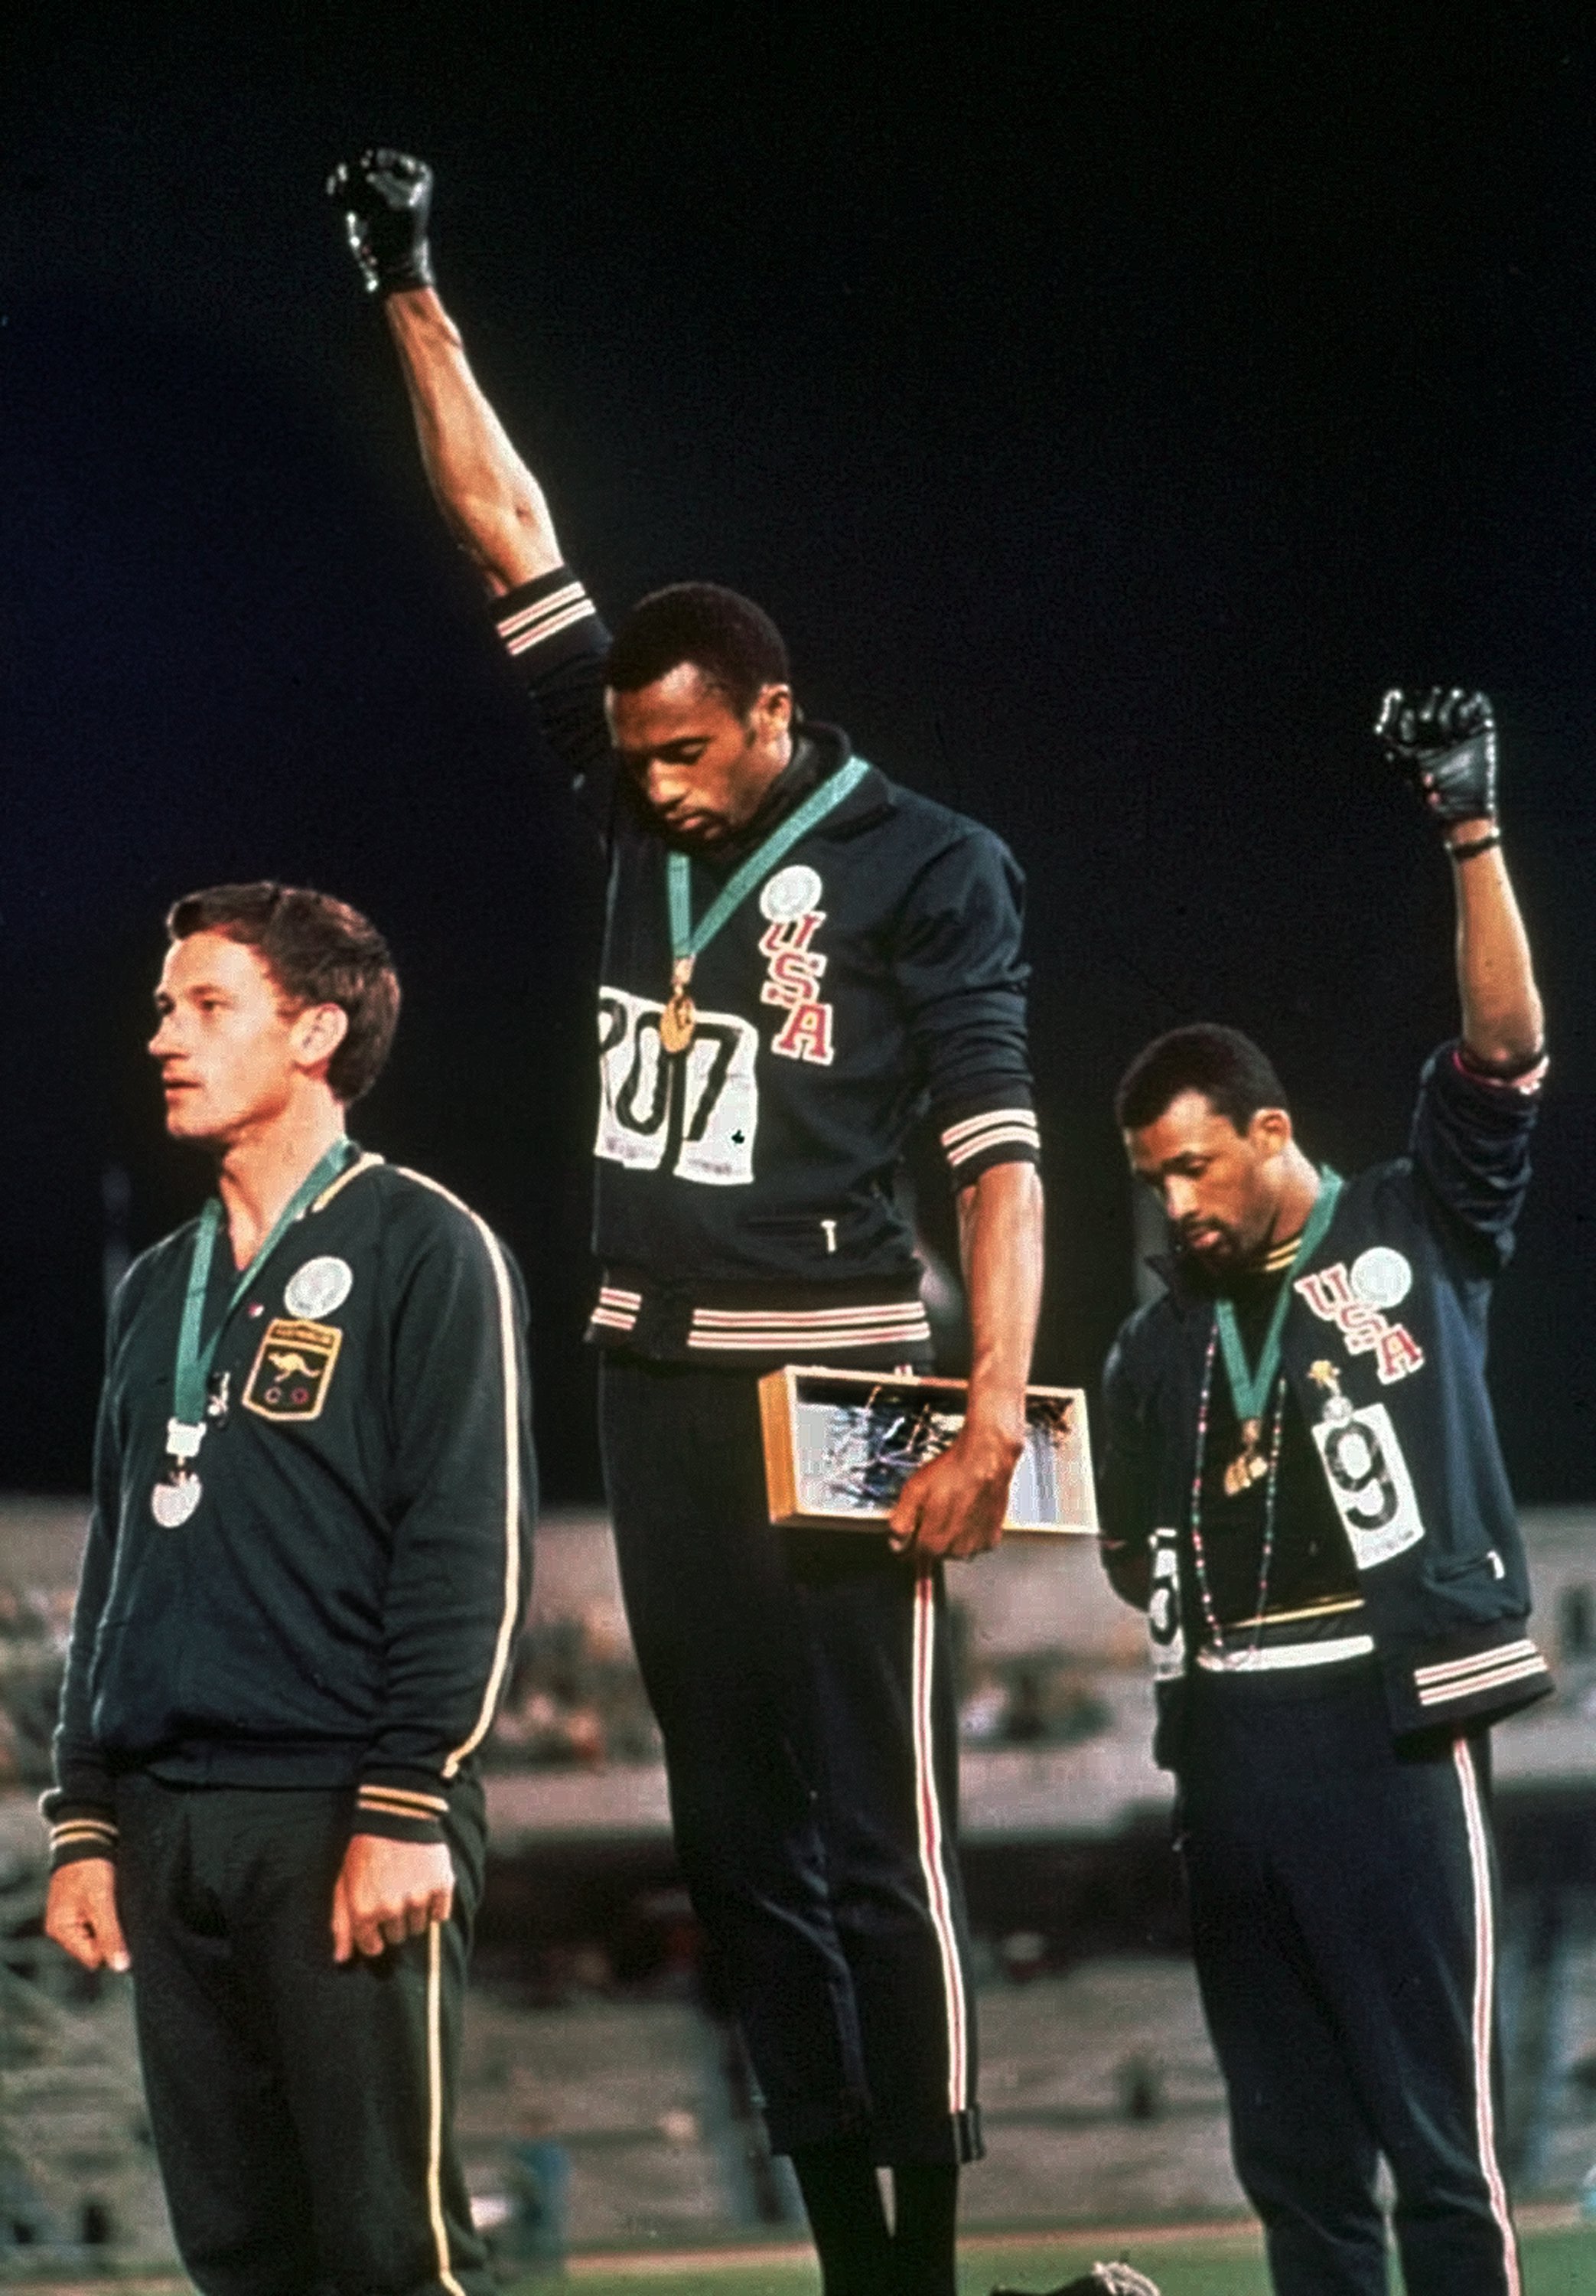 Extending gloved hands skyward in racial protest, U.S. athletes Tommie Smith, center, and John Carlos stare downward during the playing of the Star Spangled Banner after Smith received the gold and Carlos the bronze for the 200 meter run at the Summer Olympic Games in Mexico City on Oct. 16, 1968. Australian silver medalist Peter Norman is at left. (AP Photo)